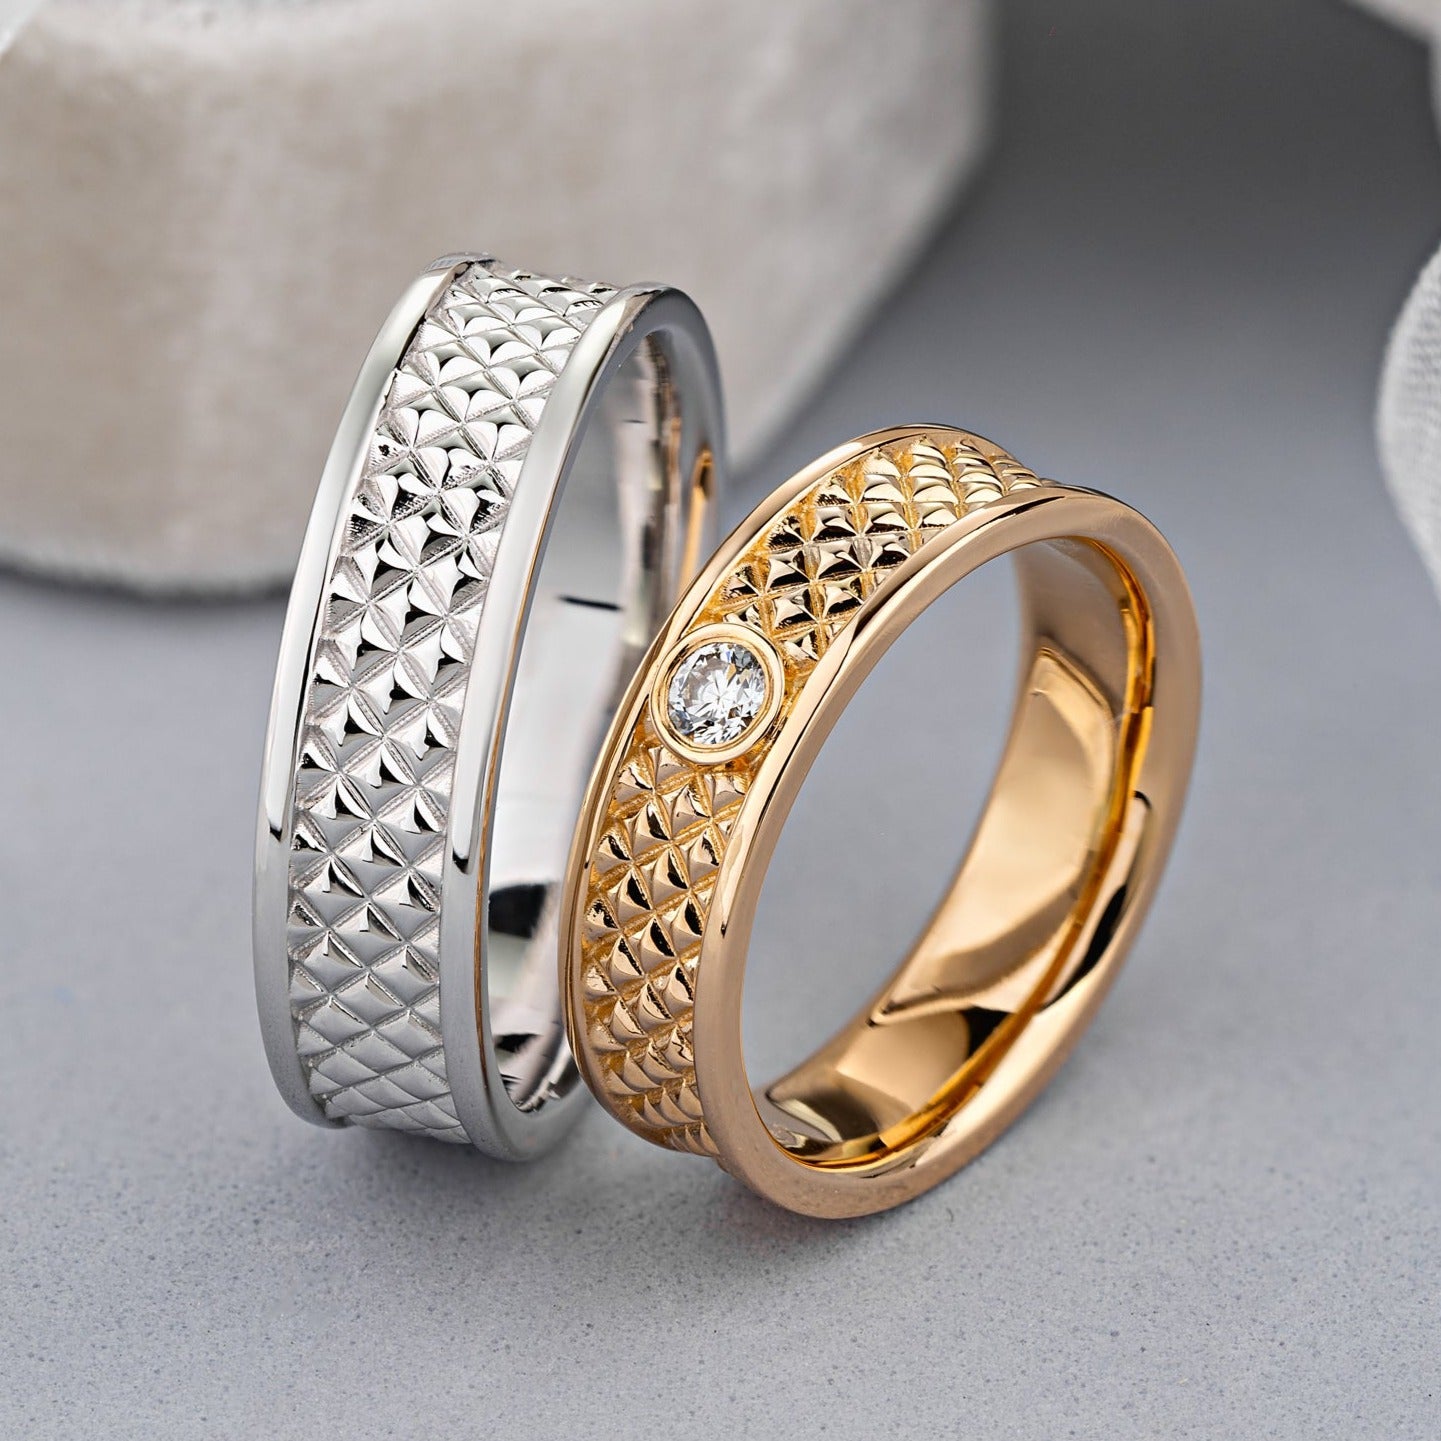 Unique wedding rings. Couple wedding rings. Matching wedding rings set. wedding band set his and hers. Gold wedding rings with diamond. 